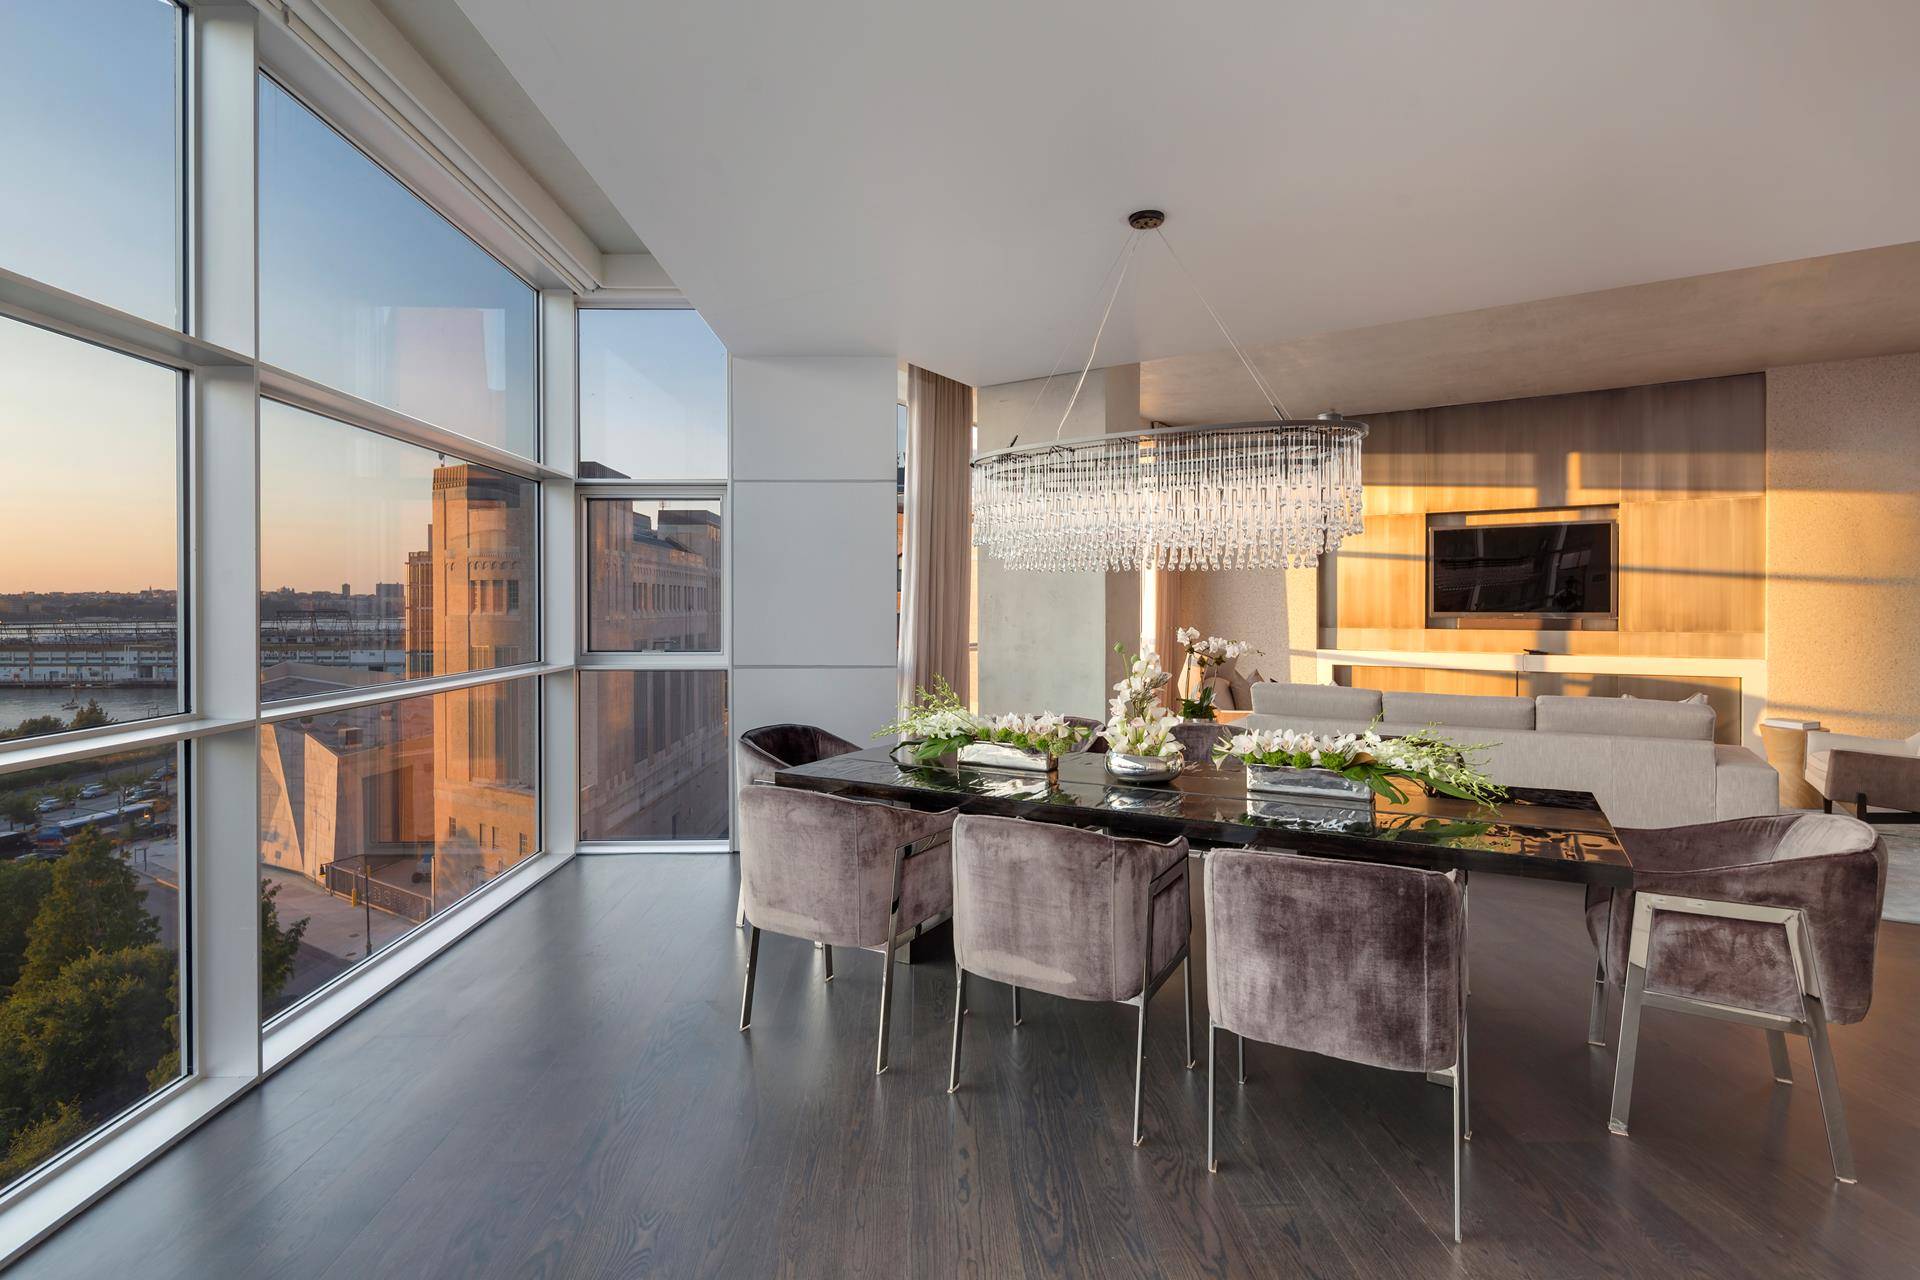 Jaw dropping panoramic views, a one of a kind triplex layout, extensive terraces and a private rooftop outdoor swimming pool make this the most unique and desirable penthouse apartment downtown.